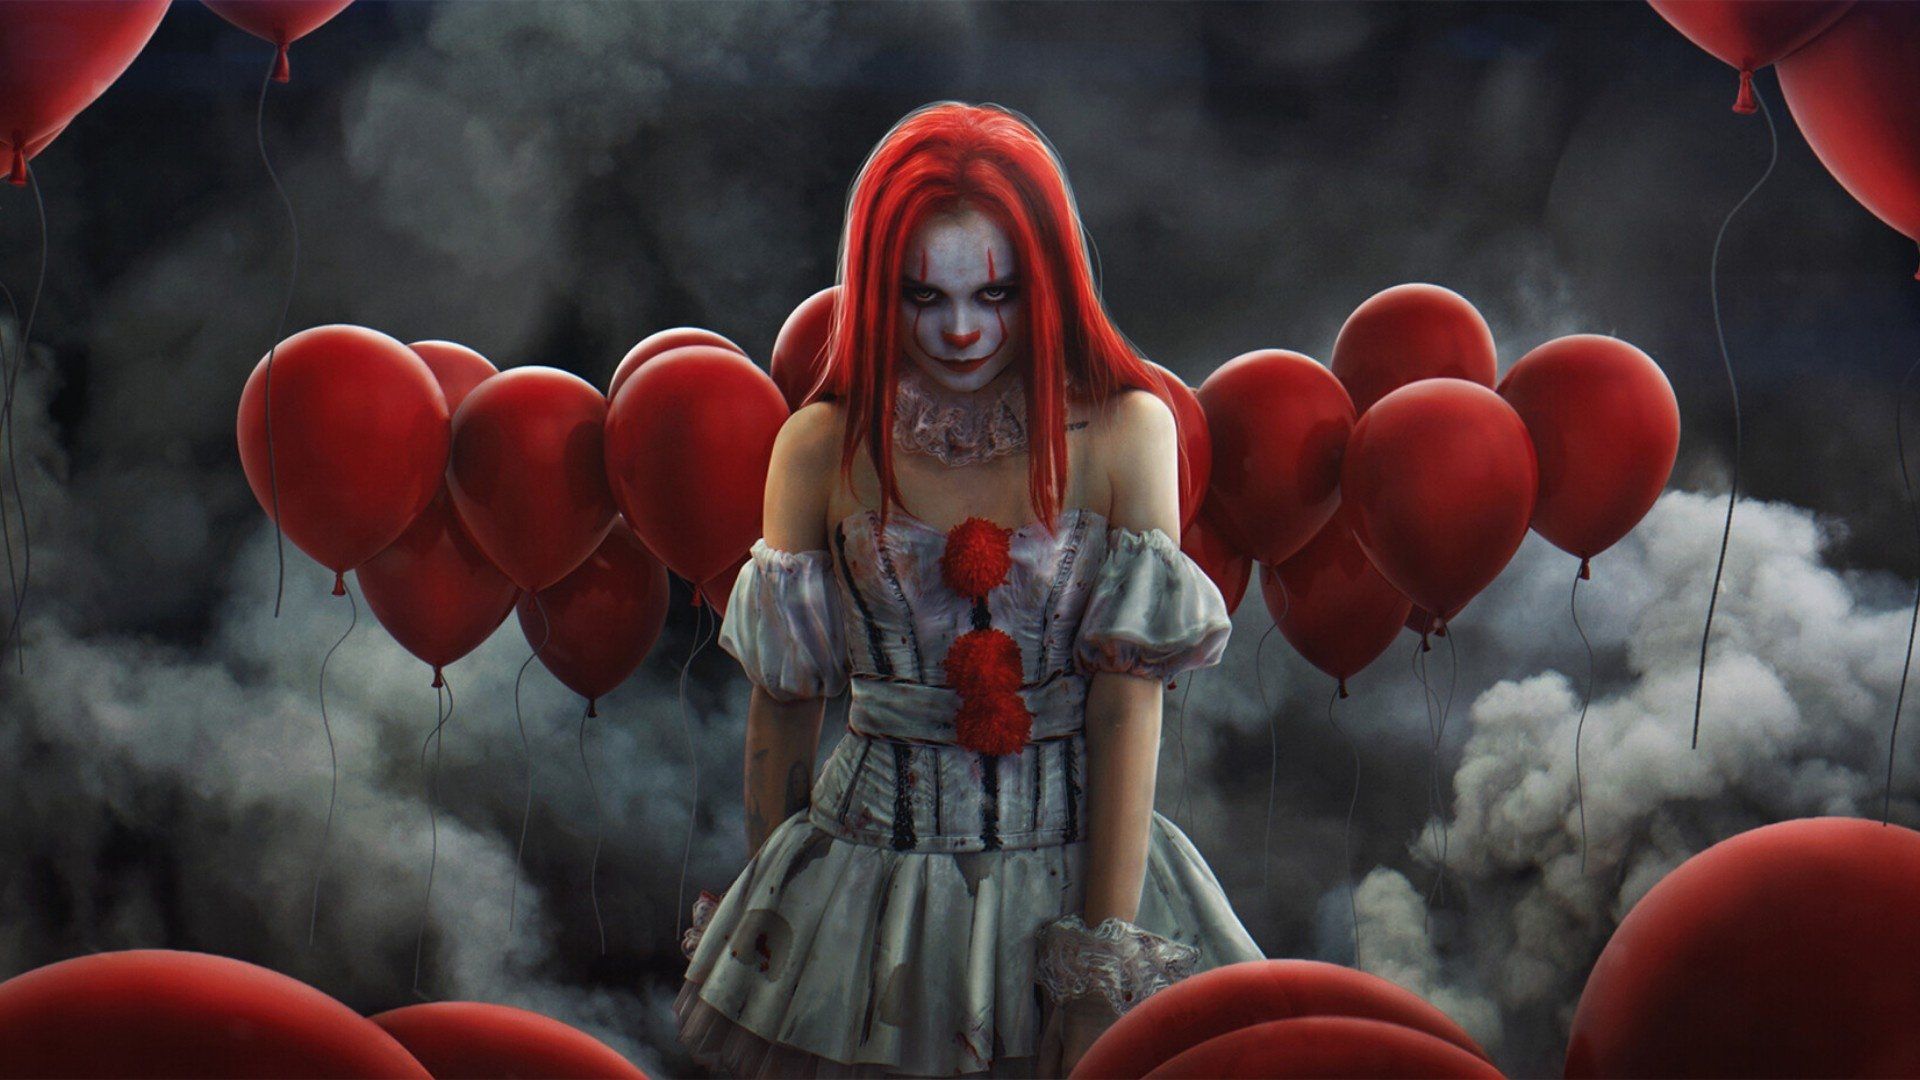 Pennywise the clown, it, horror, red balloons, clowns, it 2017 - Clown